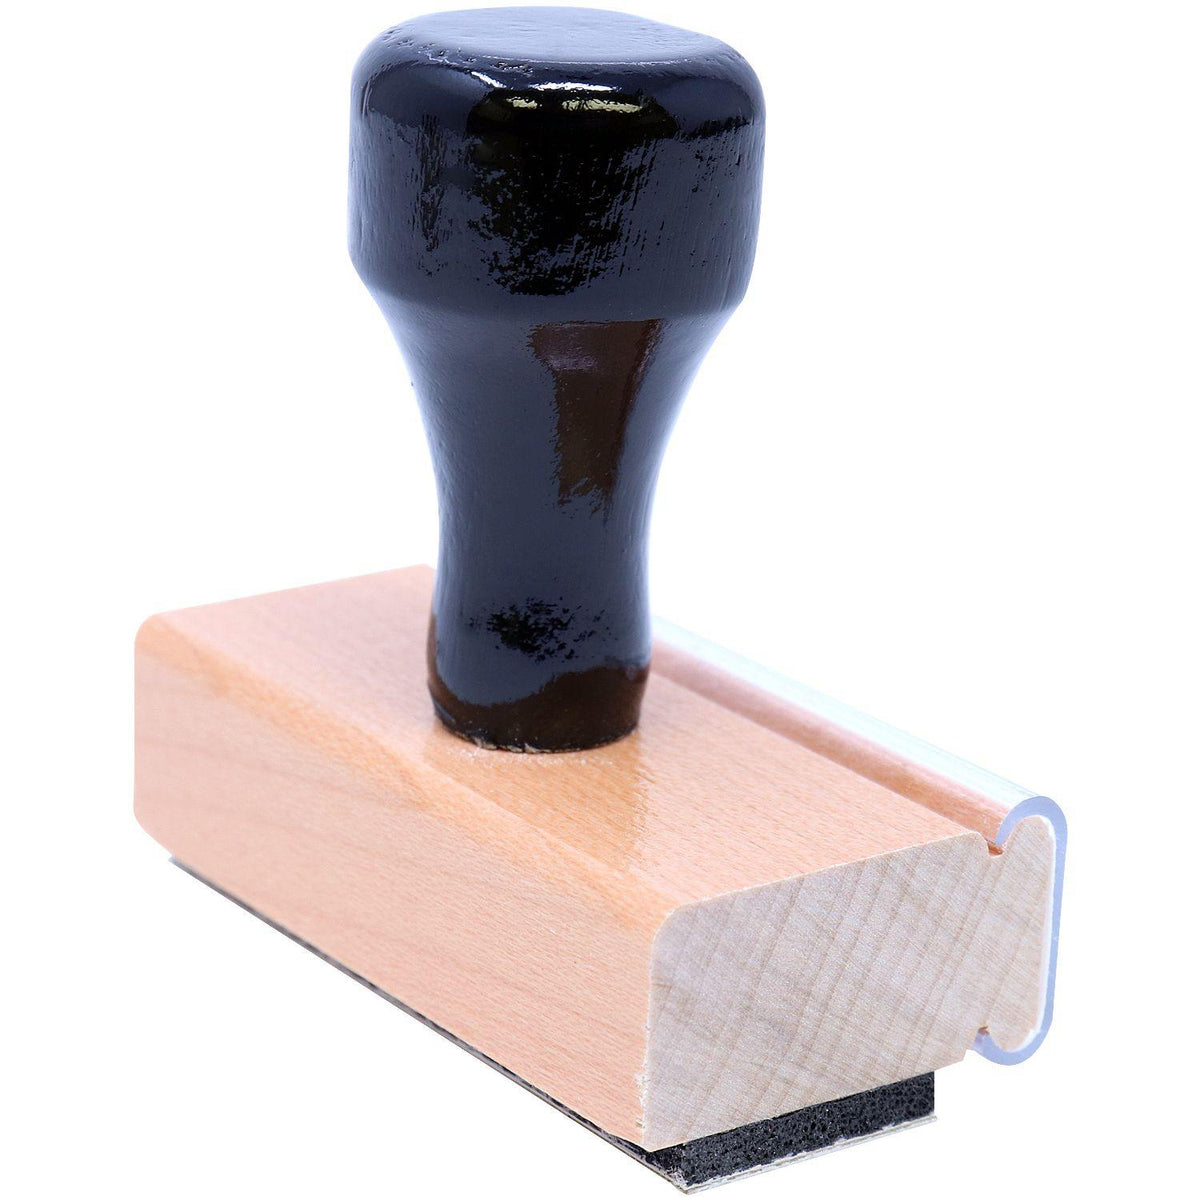 Large Void with X Rubber Stamp - Engineer Seal Stamps - Brand_Acorn, Impression Size_Large, Stamp Type_Regular Stamp, Type of Use_Business, Type of Use_General, Type of Use_Office